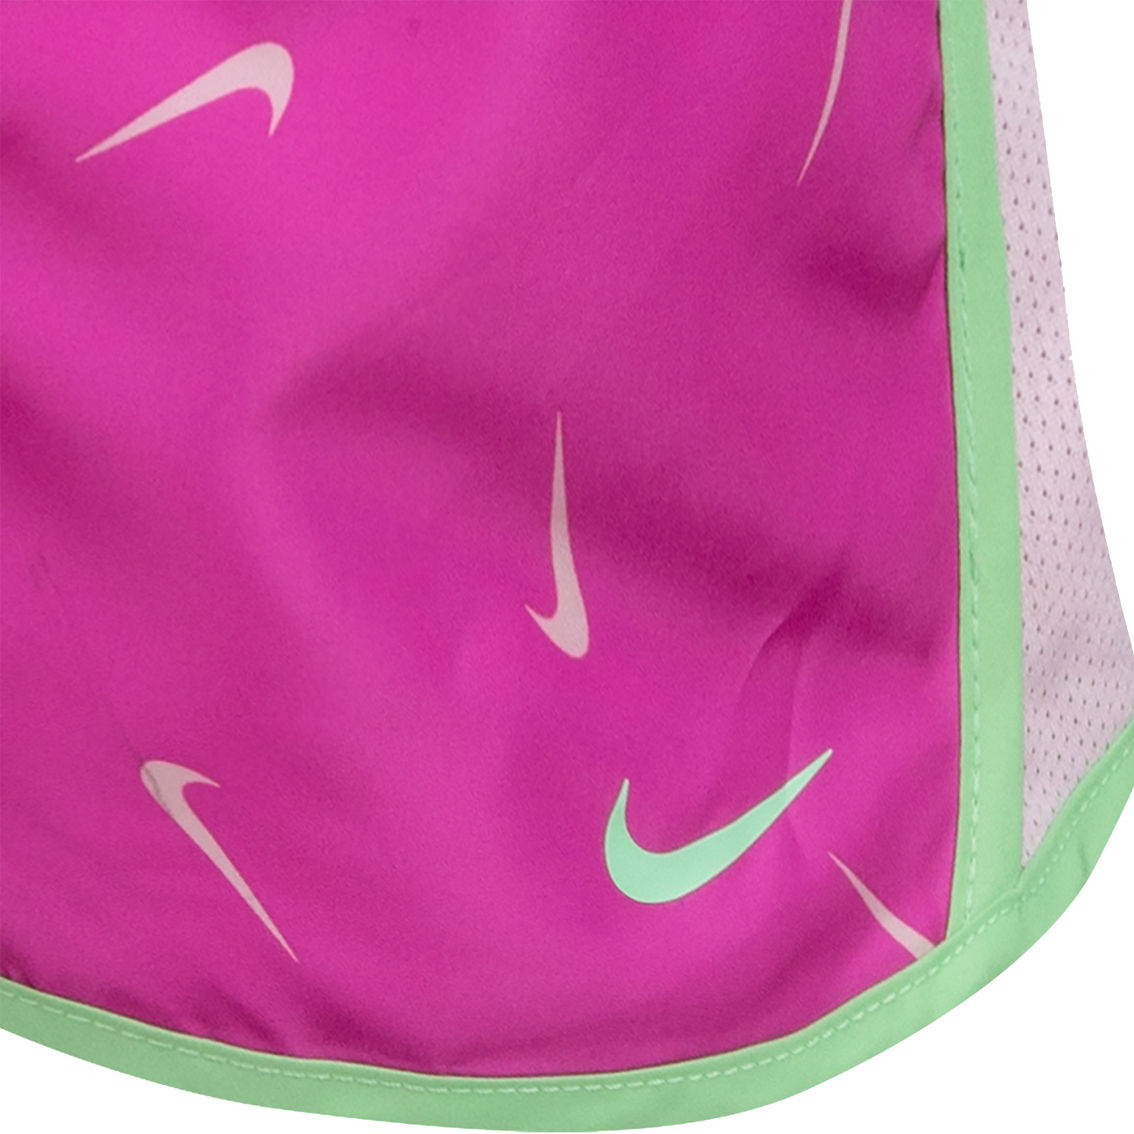 Nike Little Girls Dri-Fit Tee and Tempo Shorts 2 pc. Set - Image 8 of 8